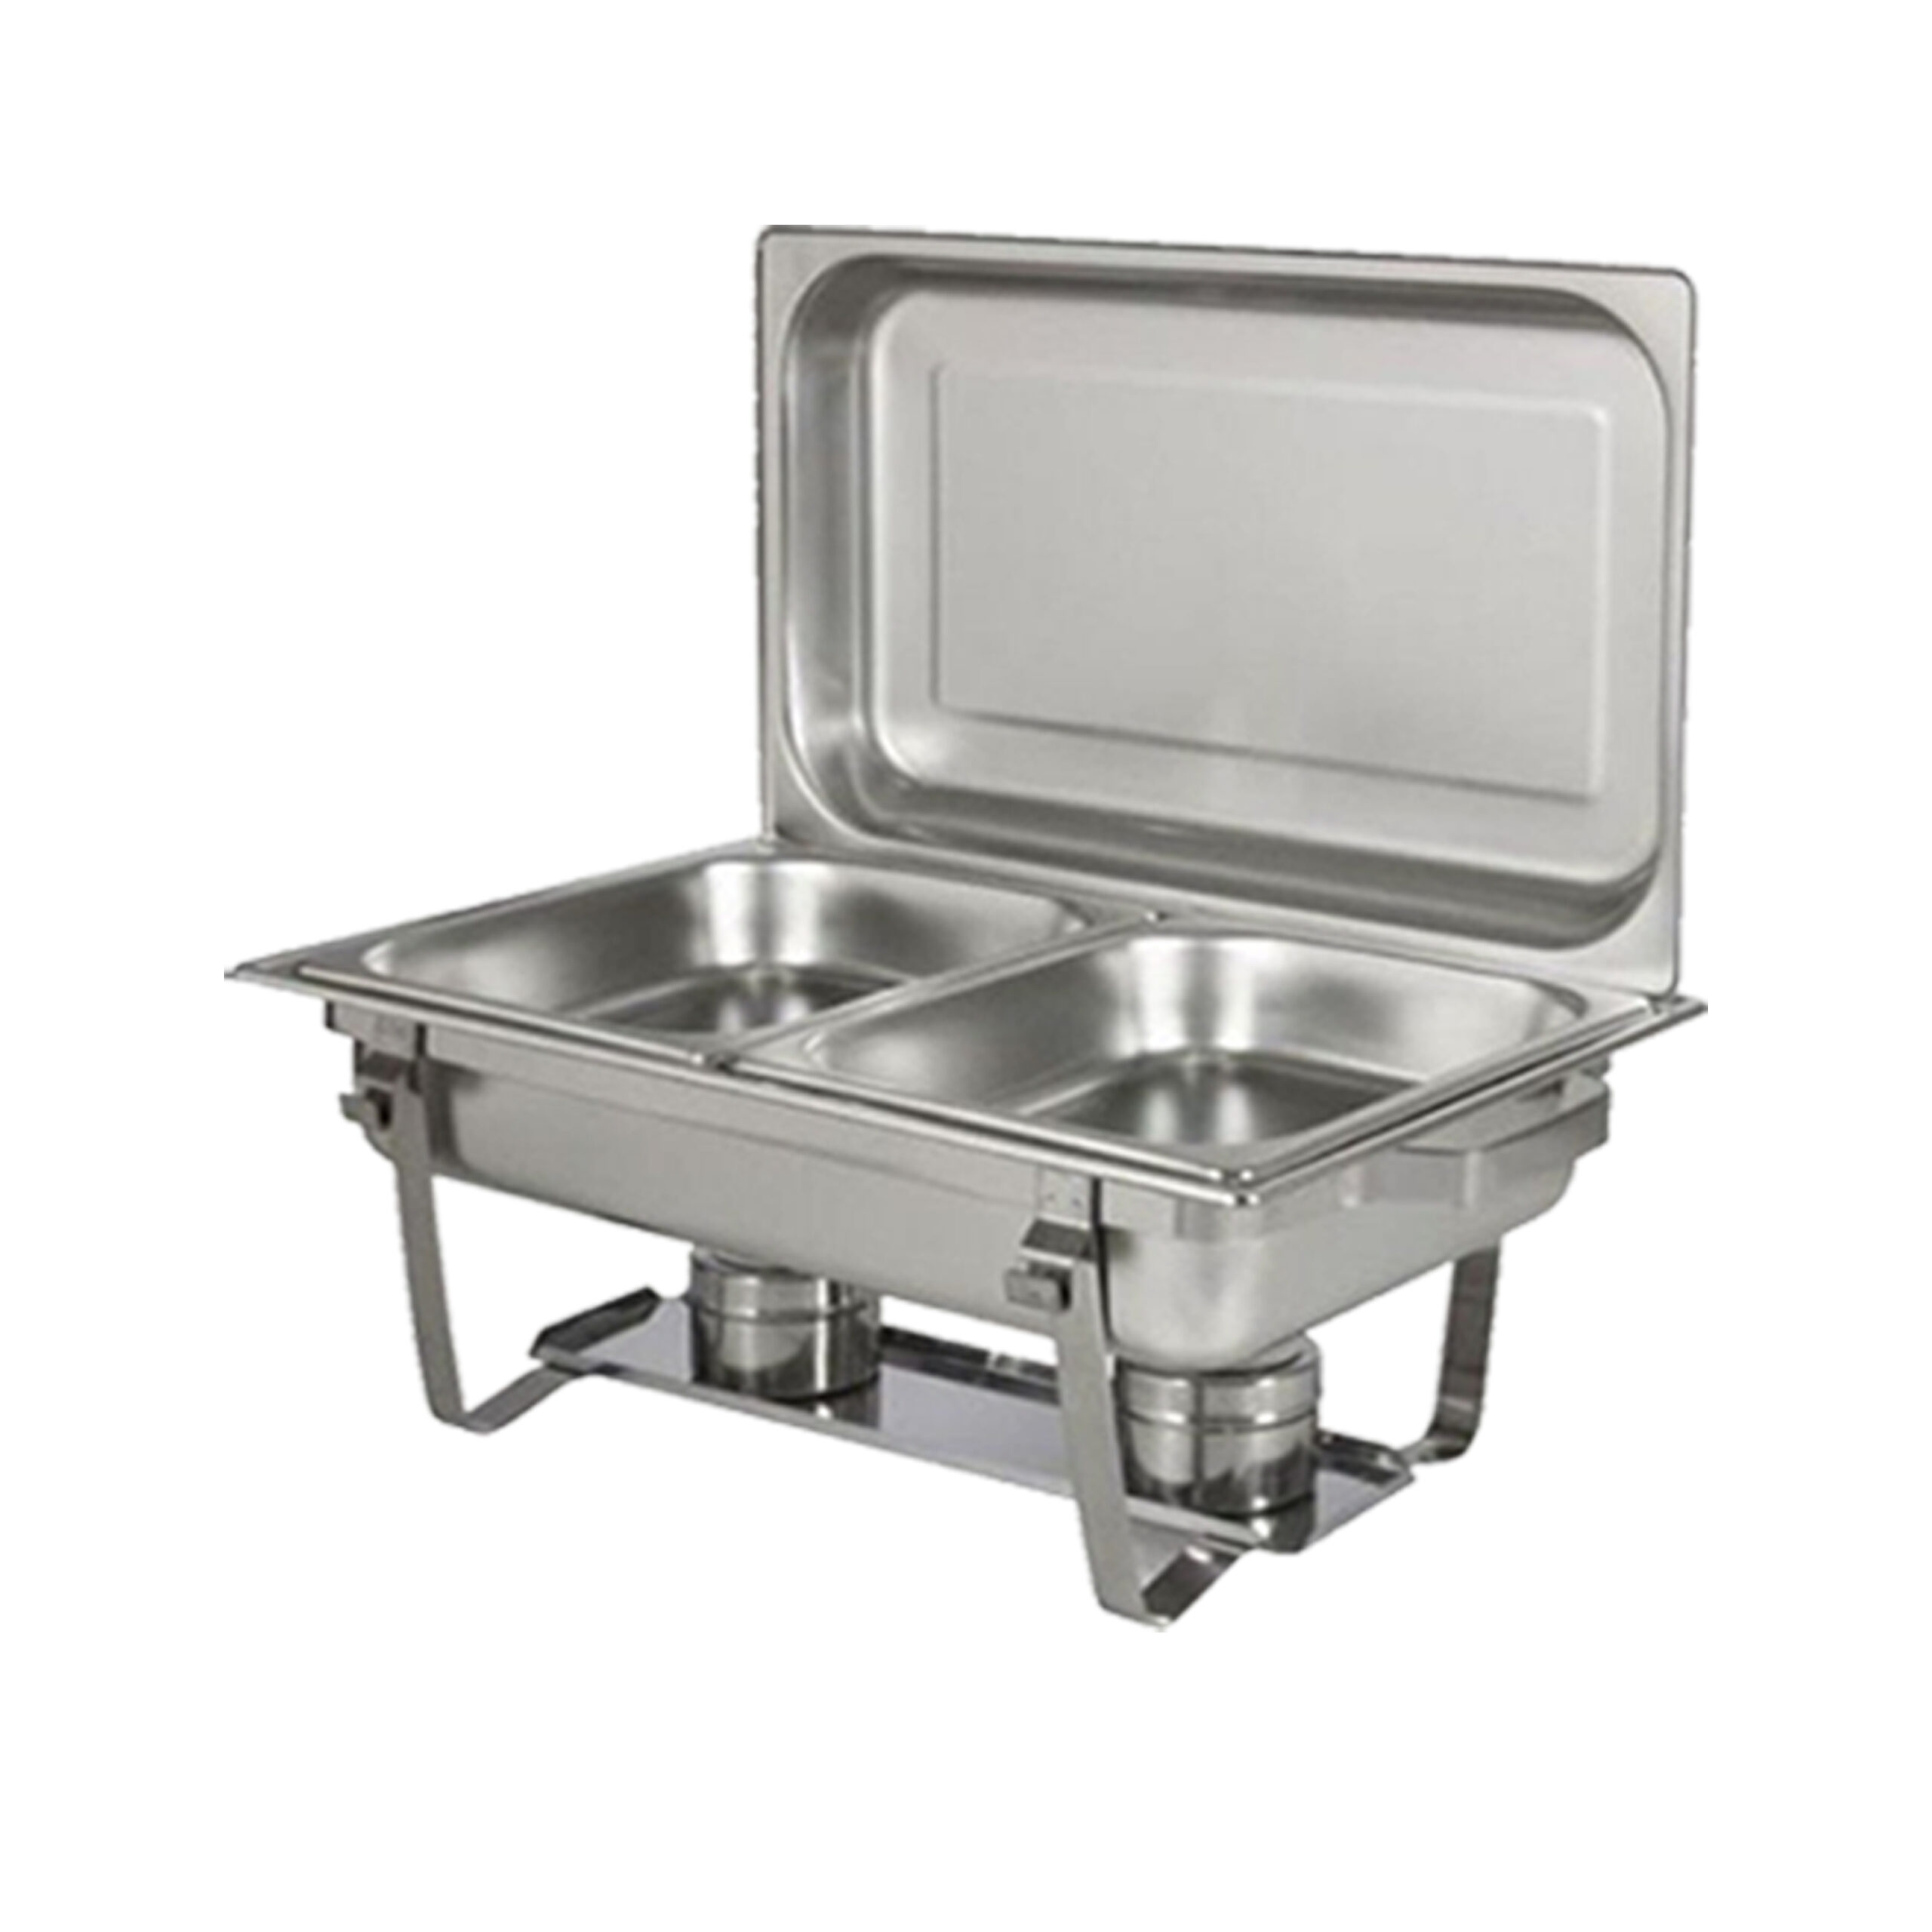 NICE ONE  STAINLESS STEEL DOUBLE CHAFING DISH  11L